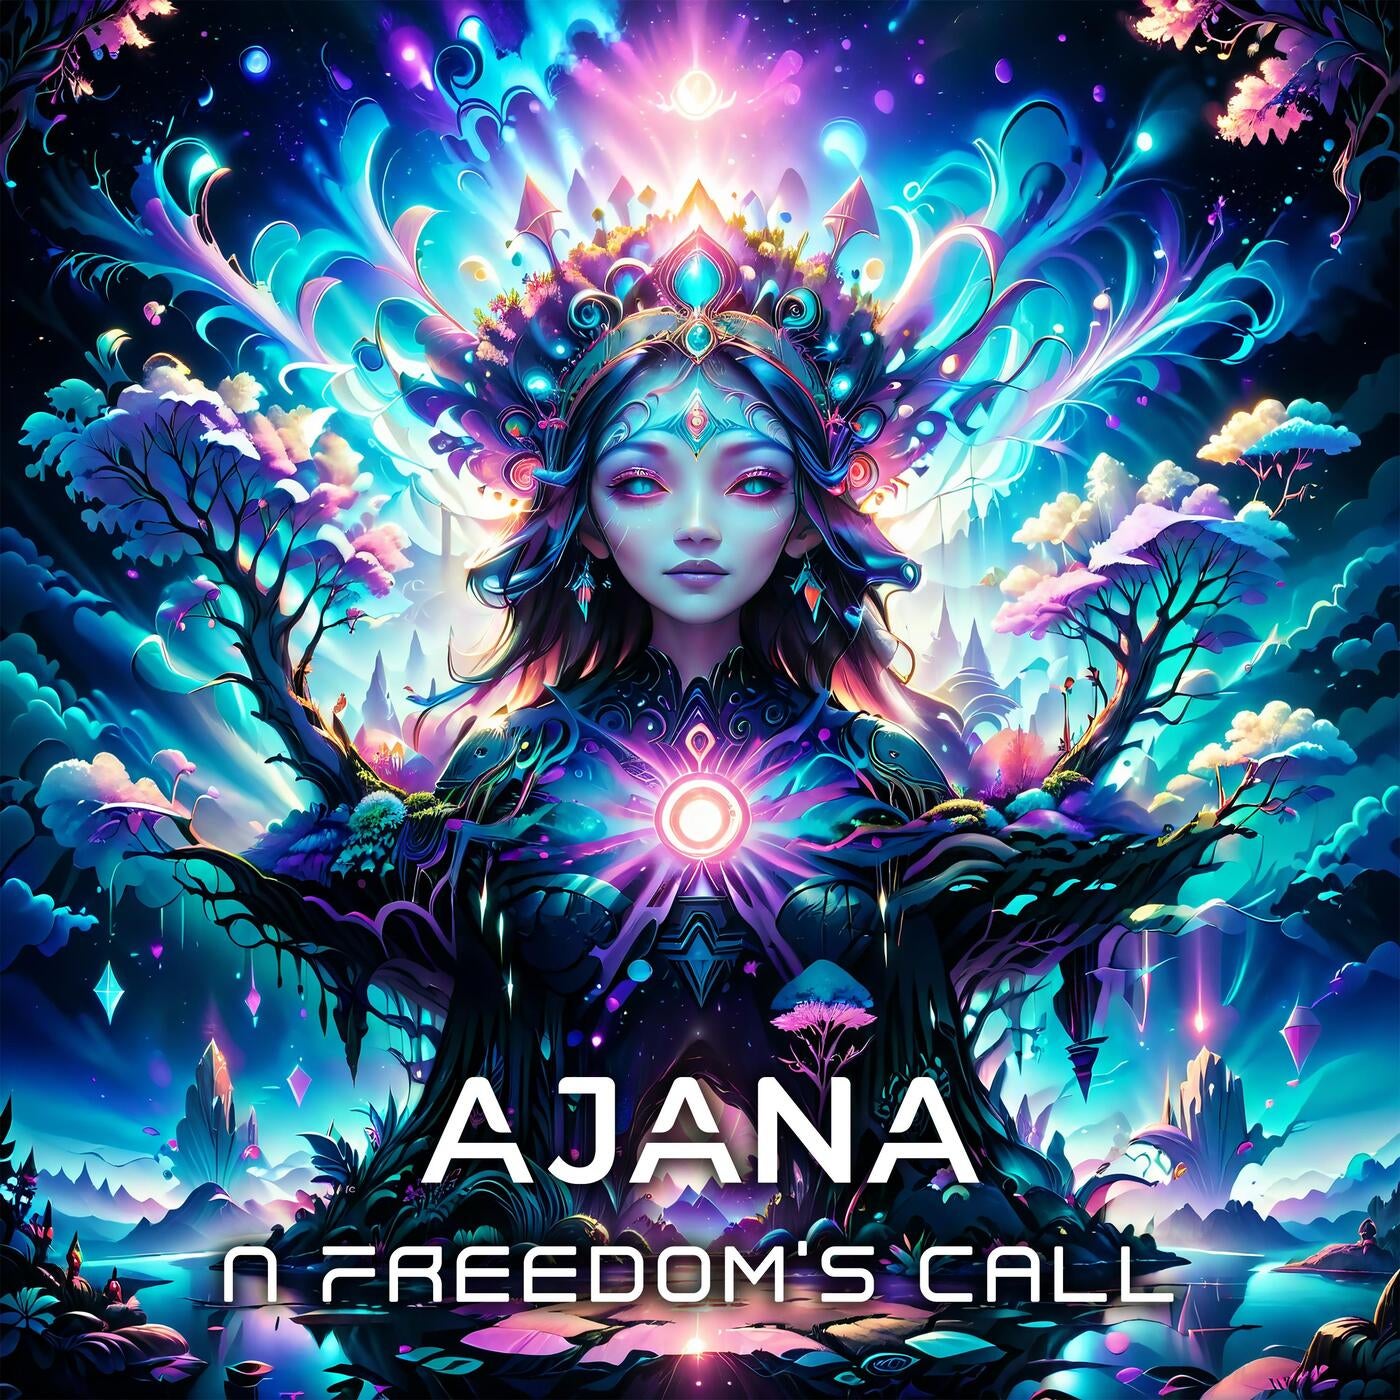 A Freedom's Call